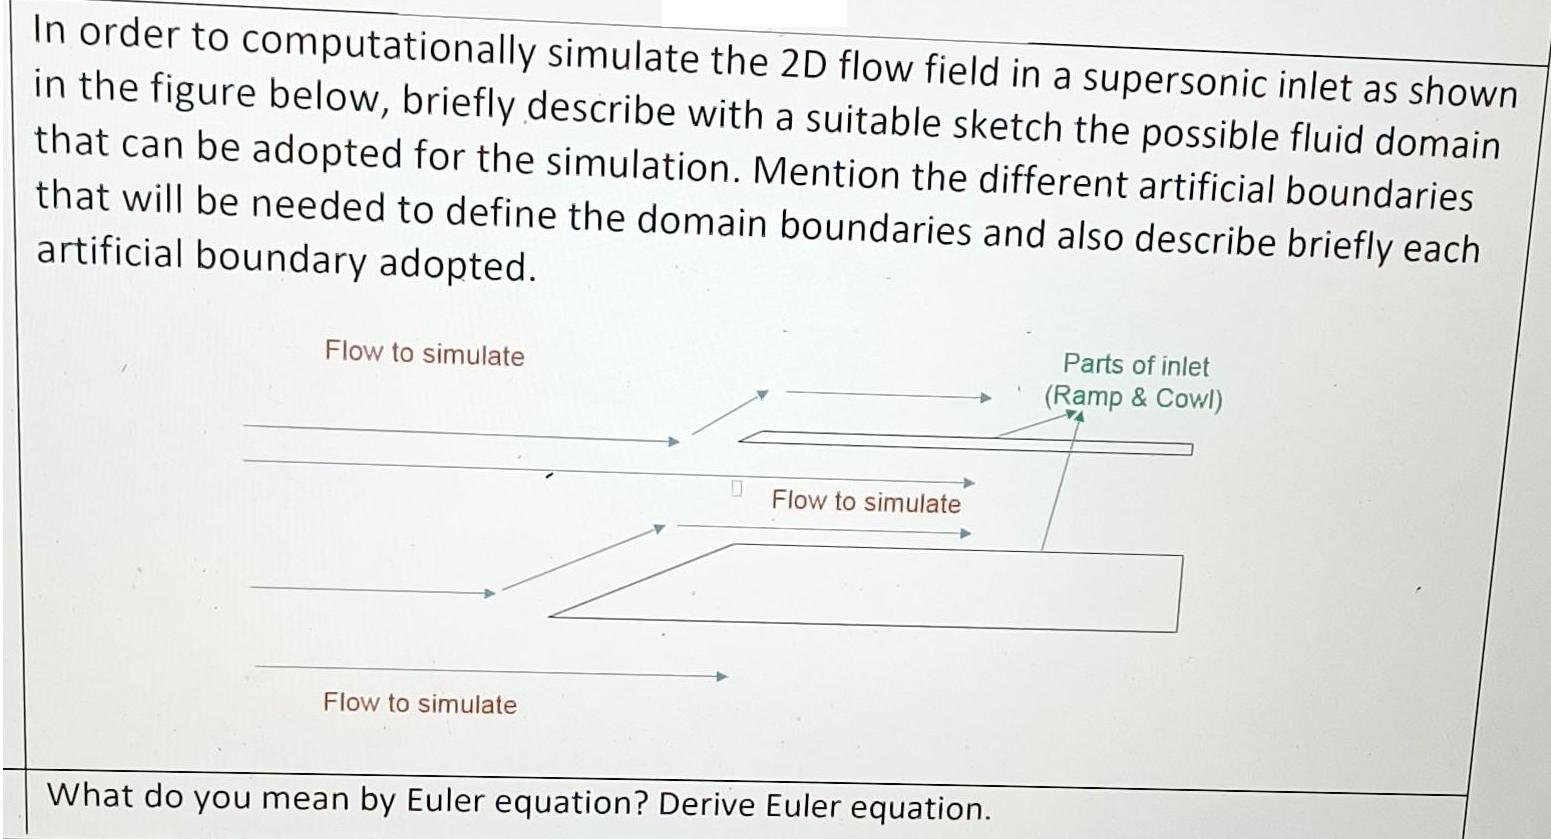 In order to computationally simulate the 2D flow field in a supersonic inlet as shown in the figure below,